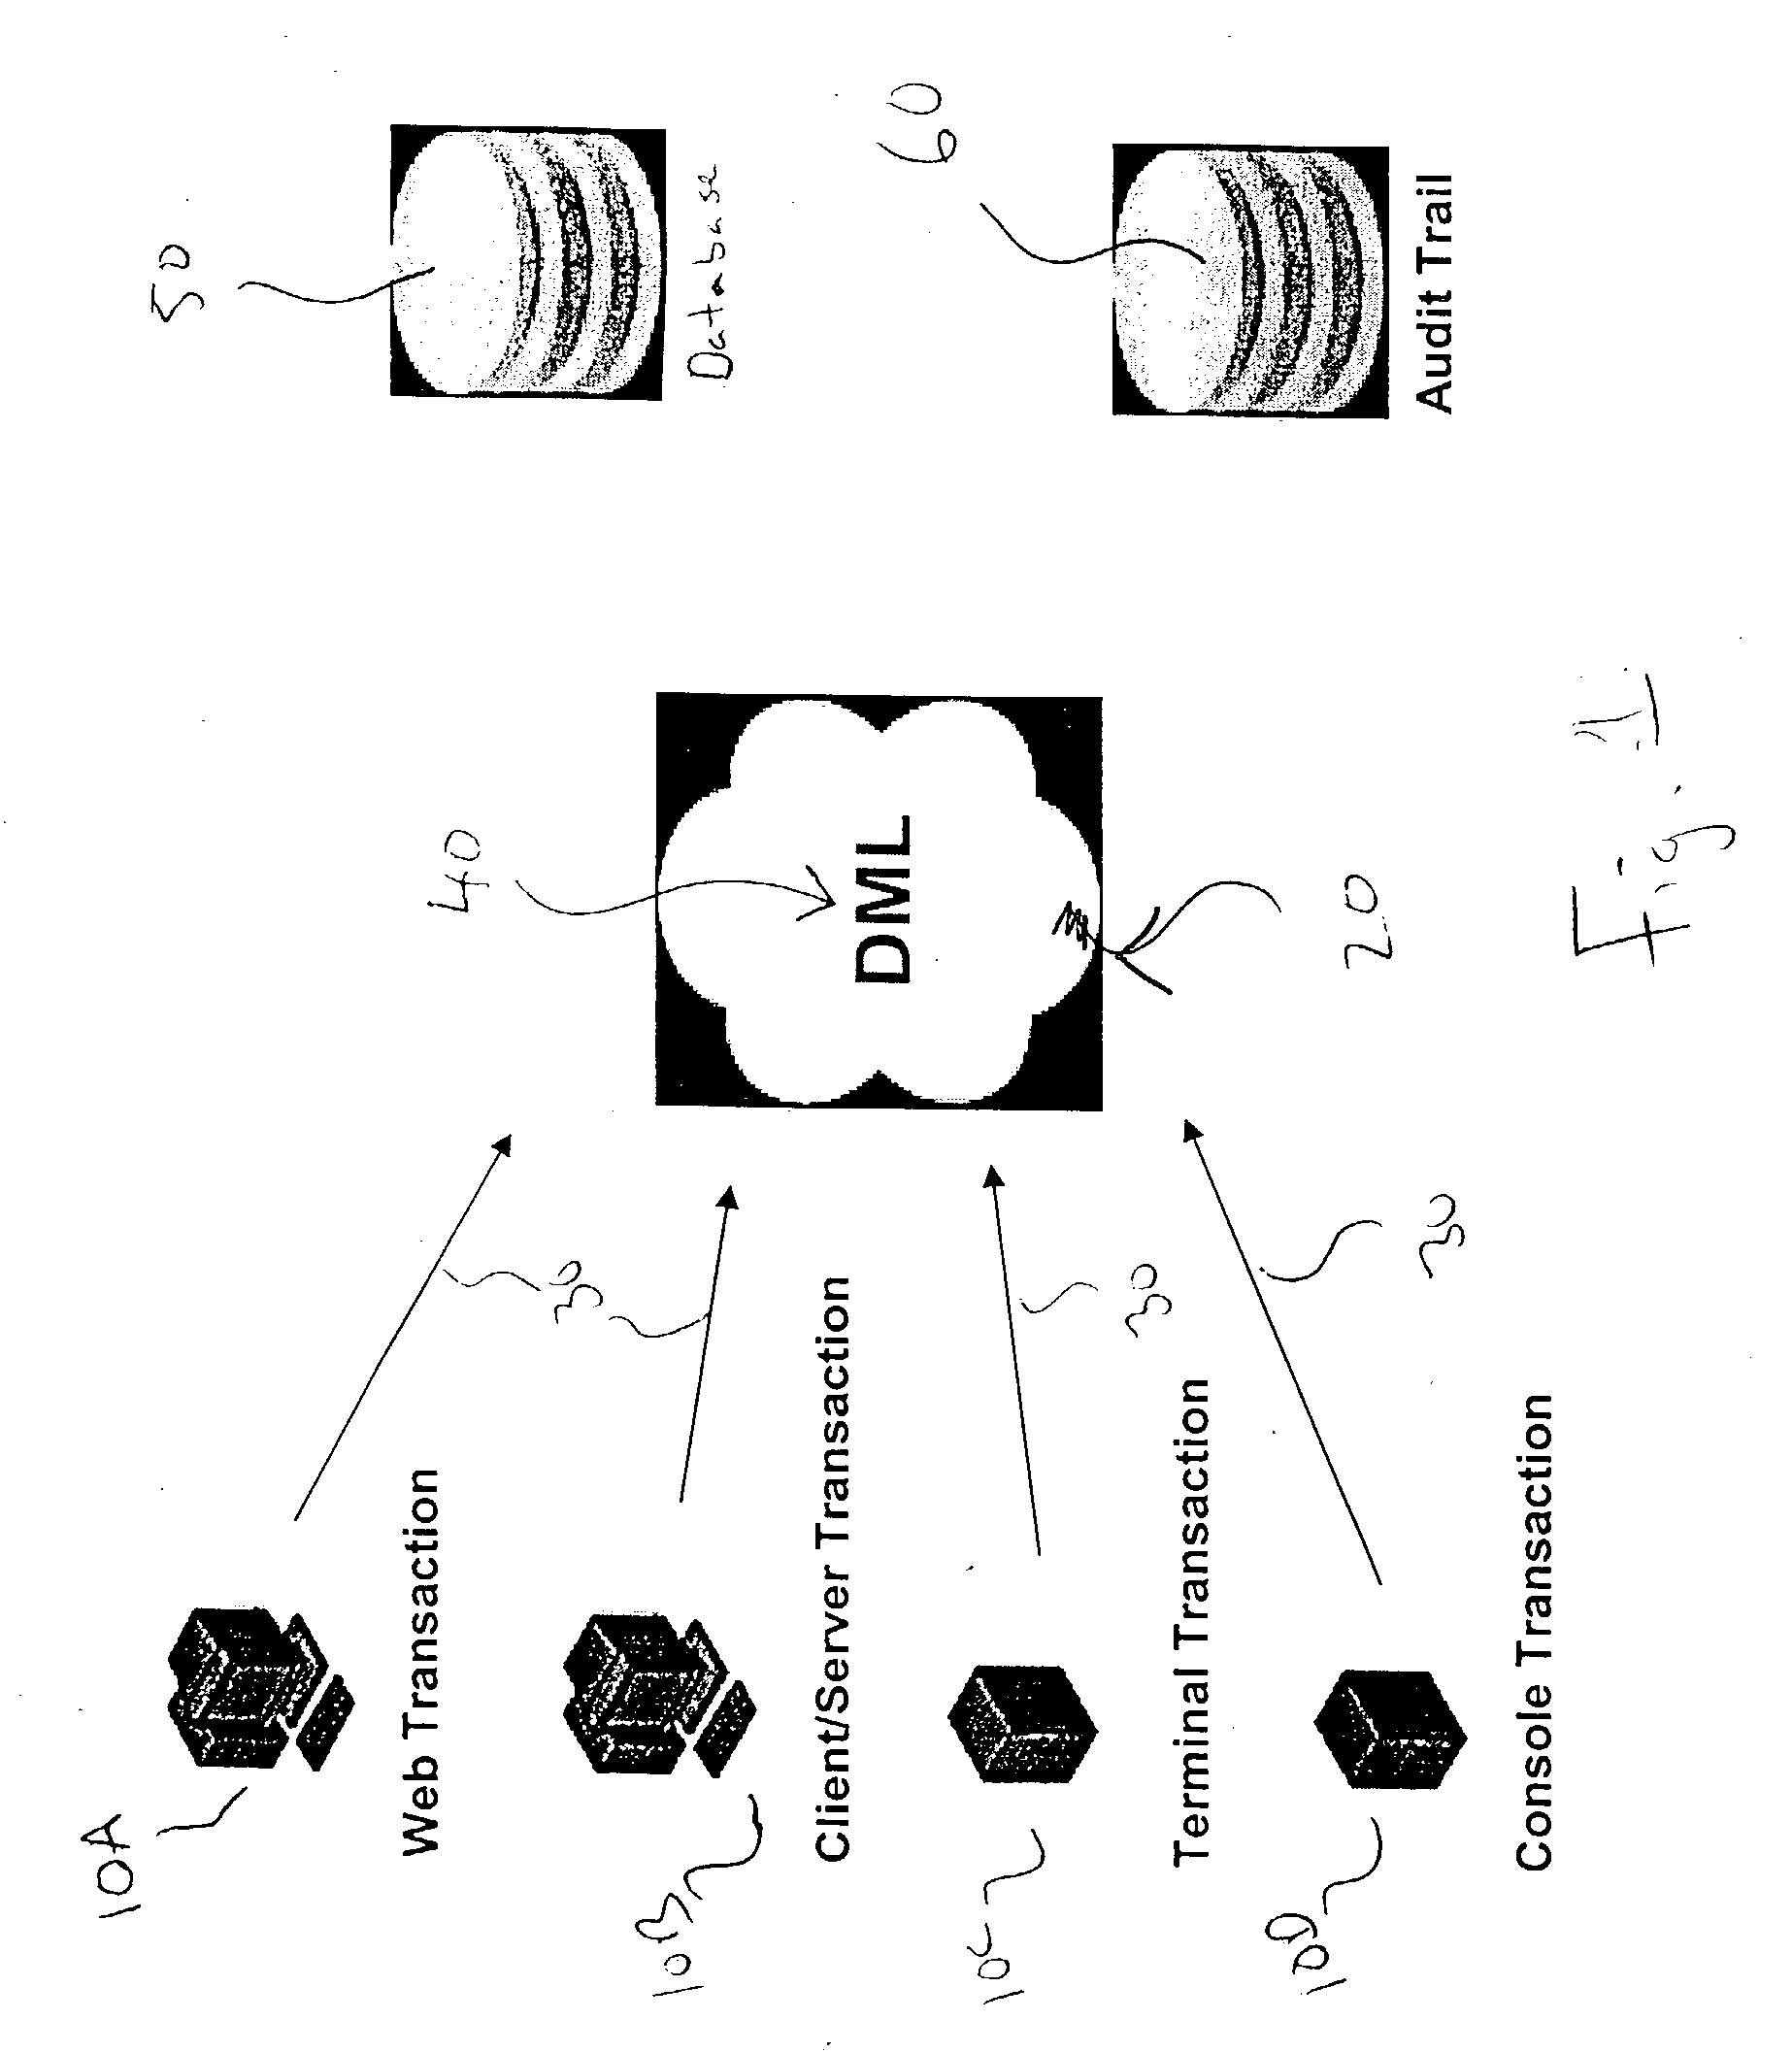 Non-intrusive, automated upgrading of electronic records